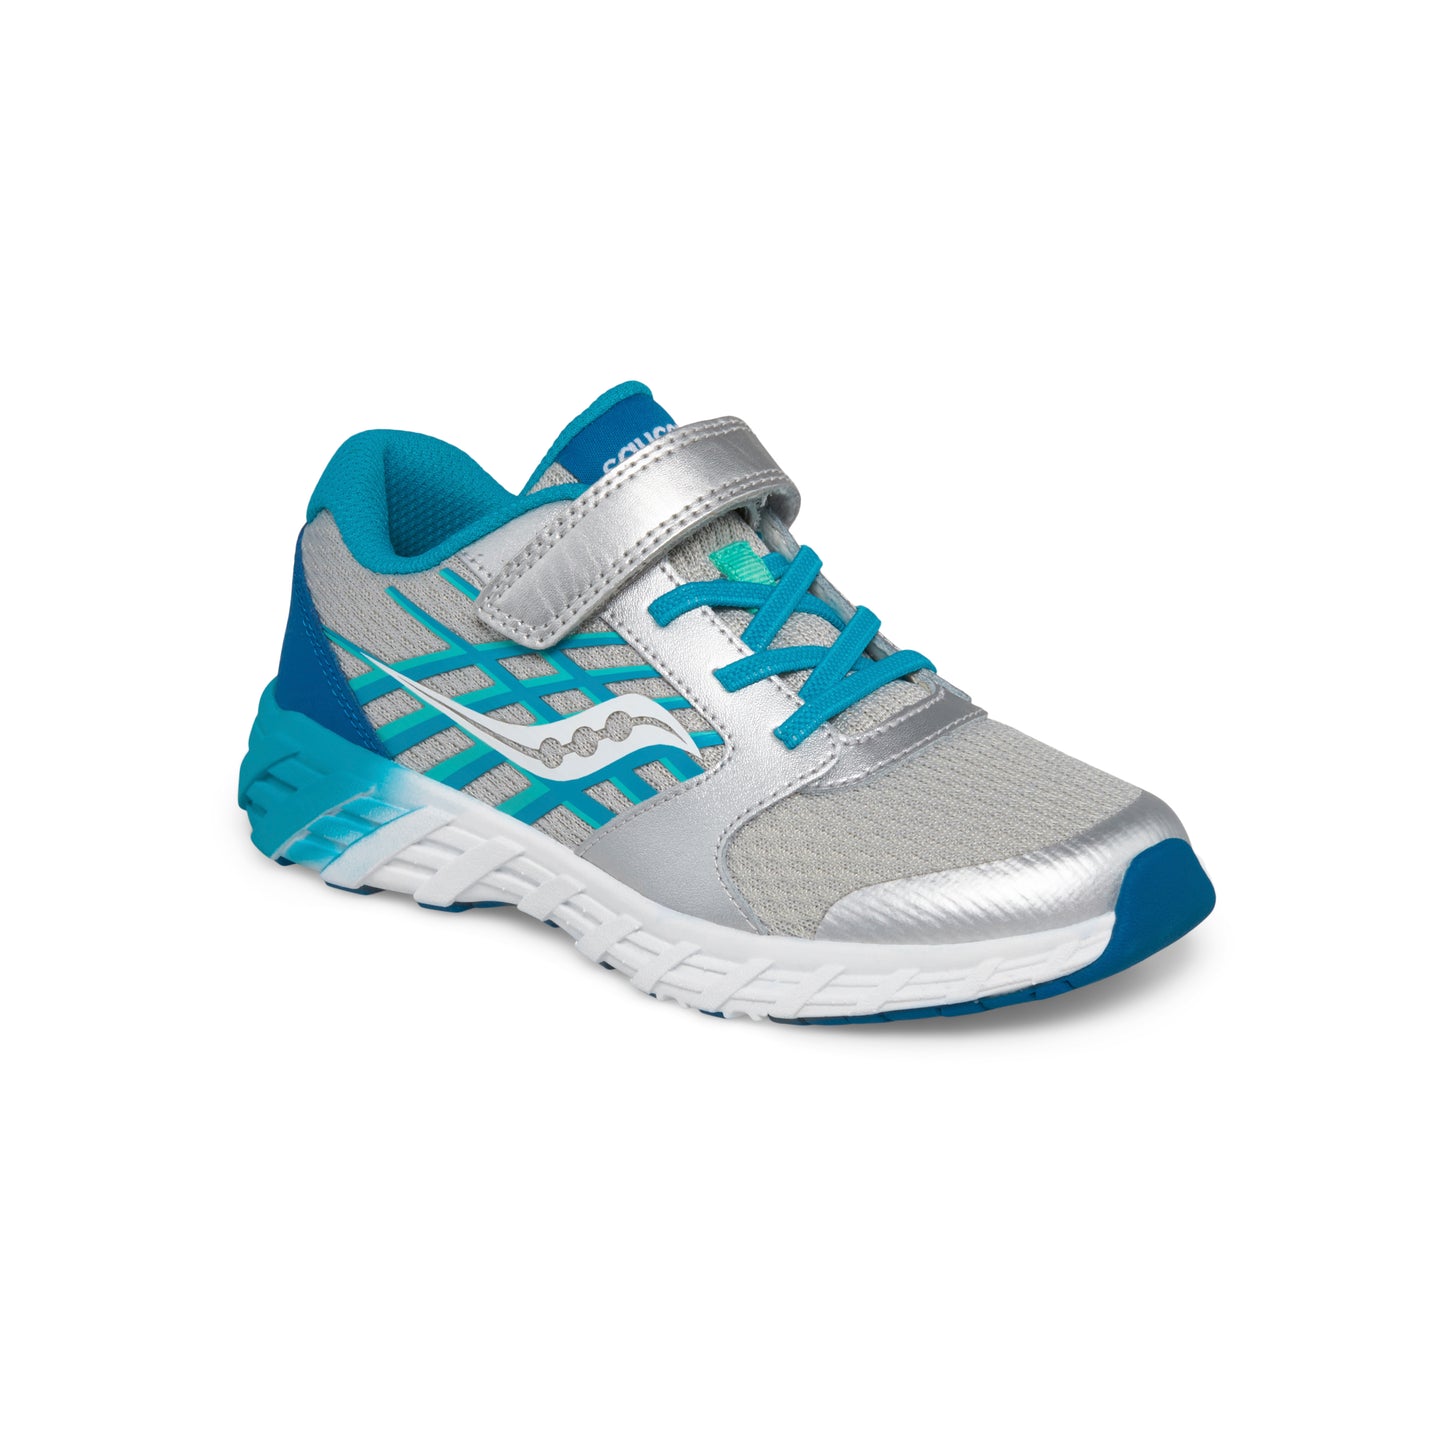 wind-ac-20-sneaker-bigkid-turquoise-silver__Turquoise/Silver_1